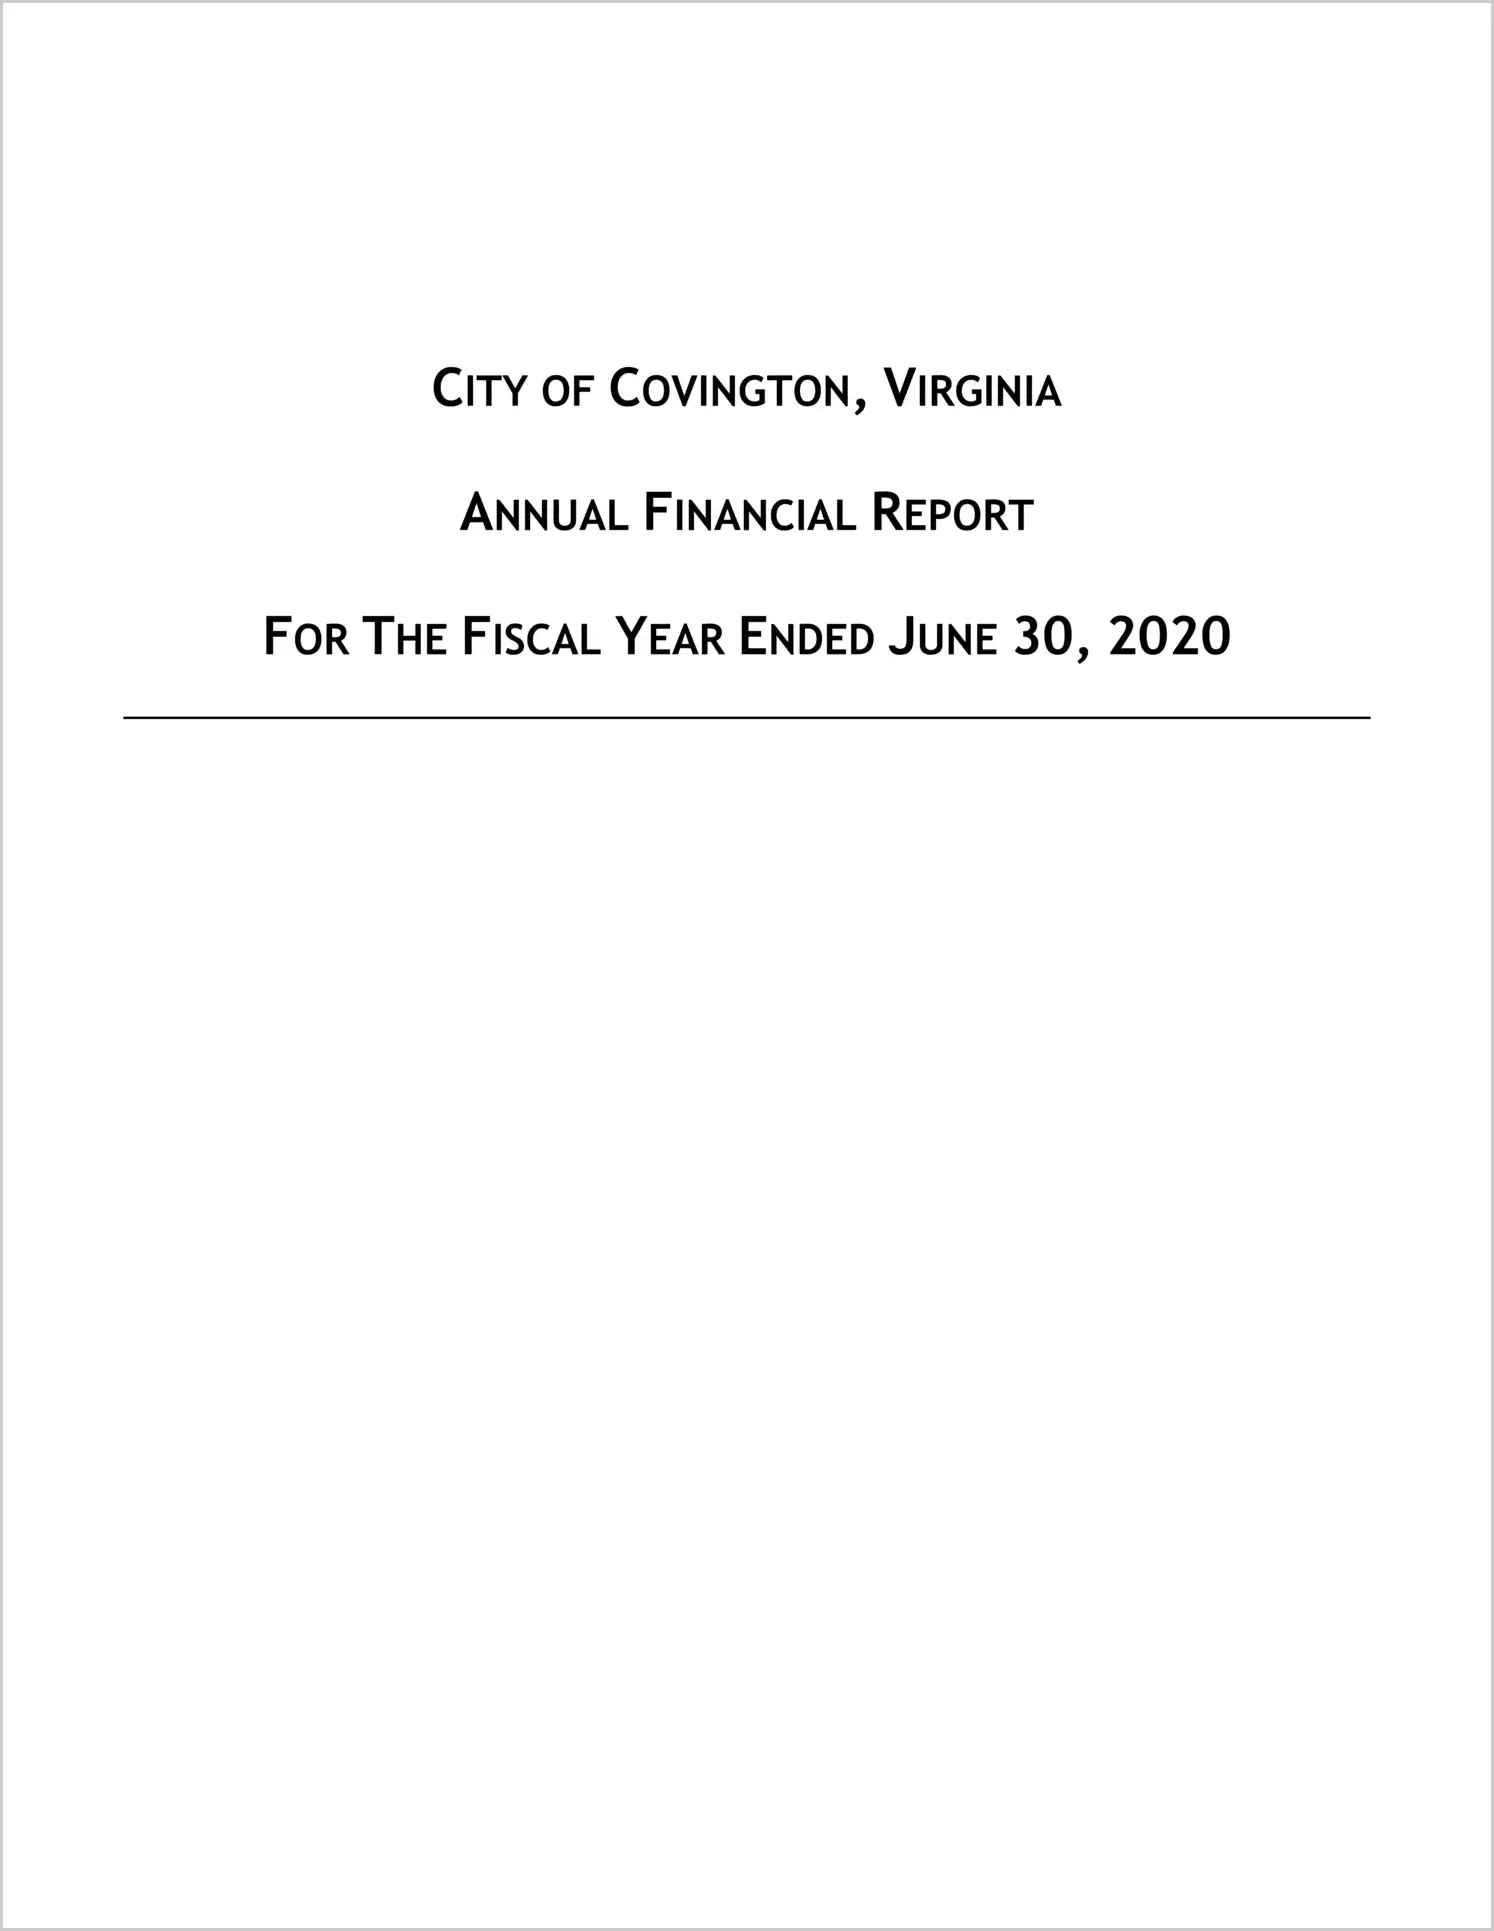 2020 Annual Financial Report for City of Covington